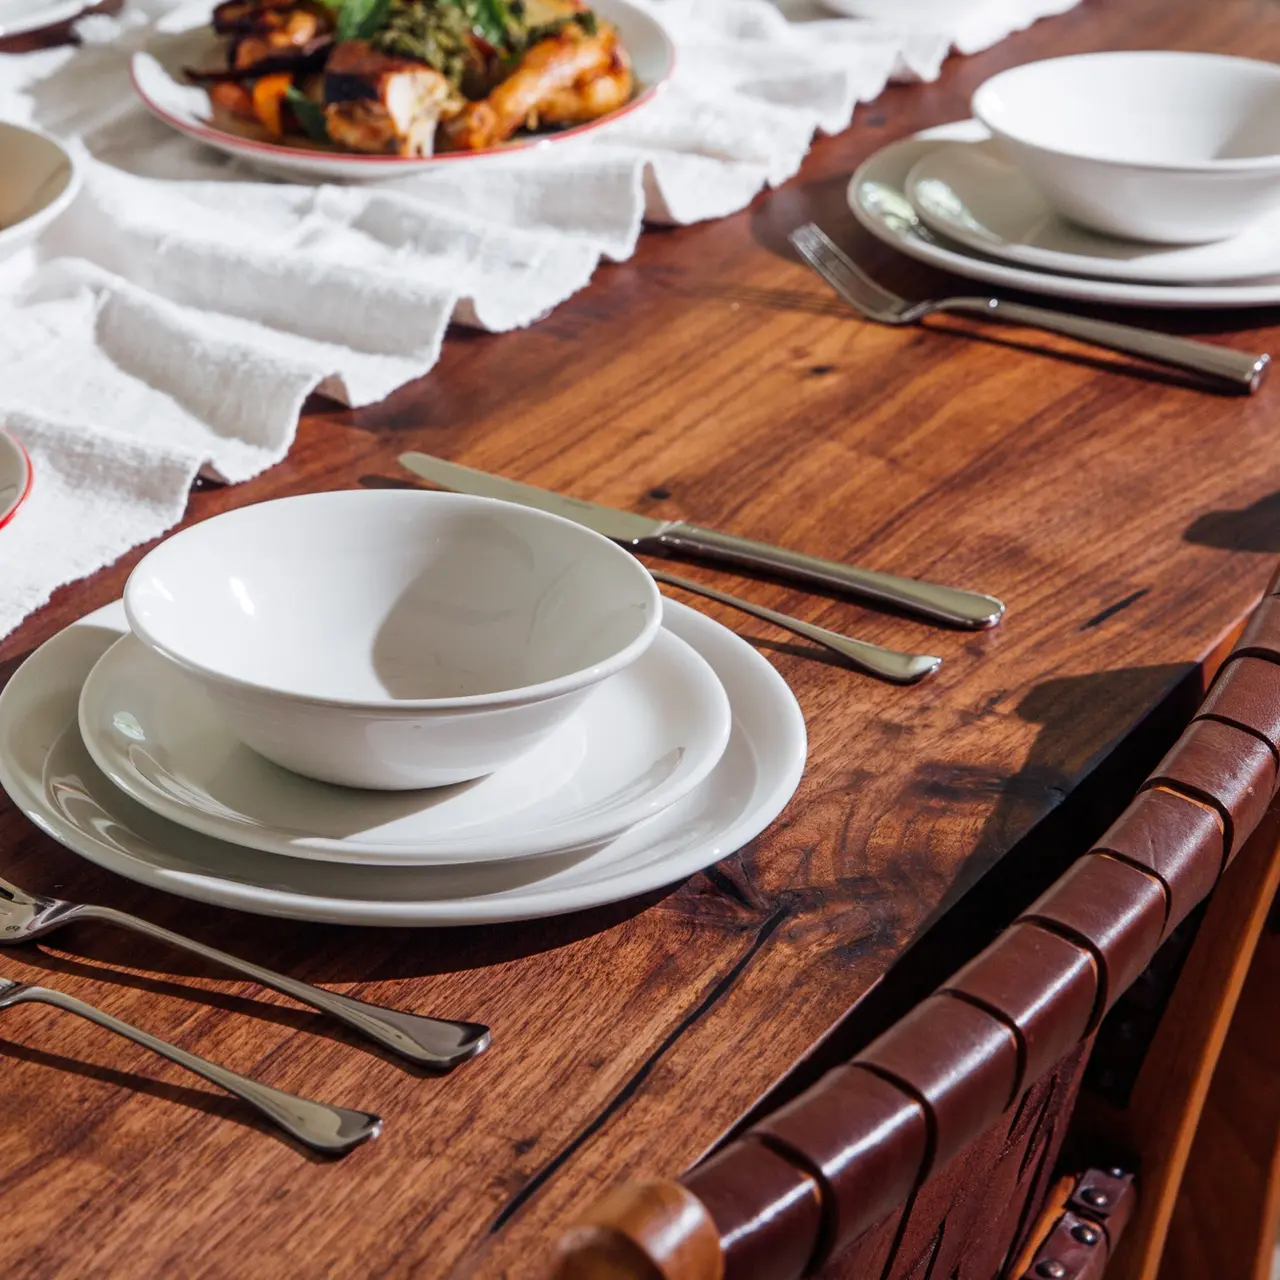 A wooden dining table set with white plates, bowls, and silverware, with a plate of food visible in the background.